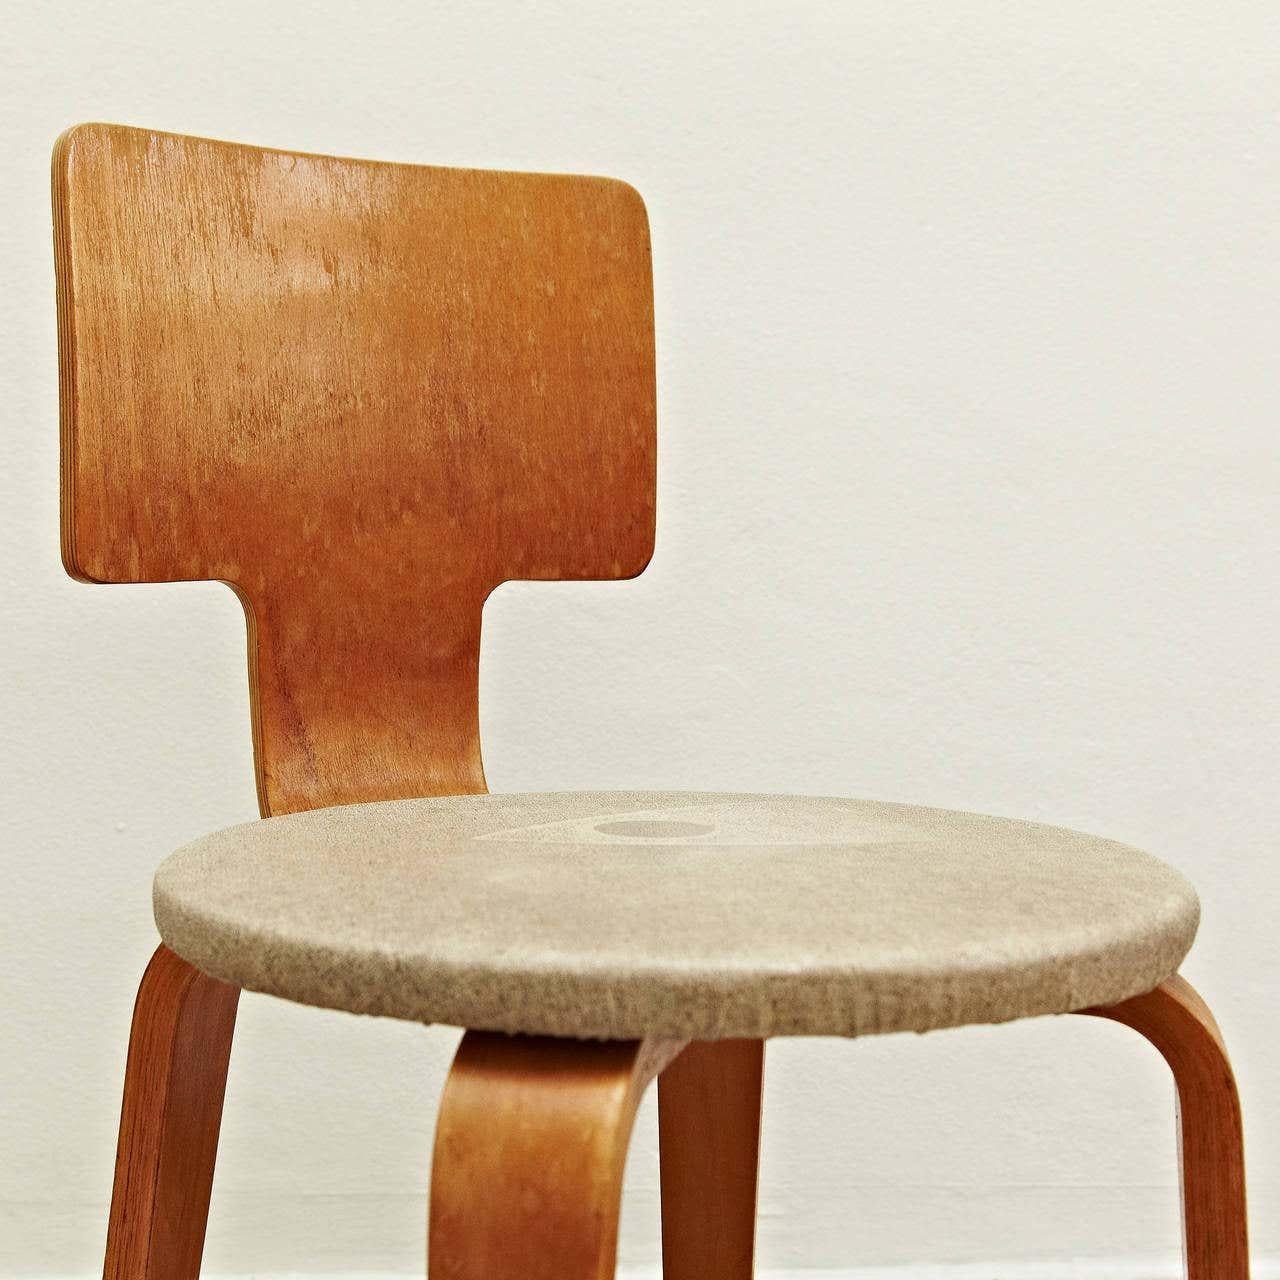 Chair designed by Cor Alons, circa 1950.
Manufactured by Den Boer Gouda, (Netherlands), circa 1950.
Laminated Birchwood plywood and original upholstery.

In good original condition, with minor wear consistent with age and use, preserving a